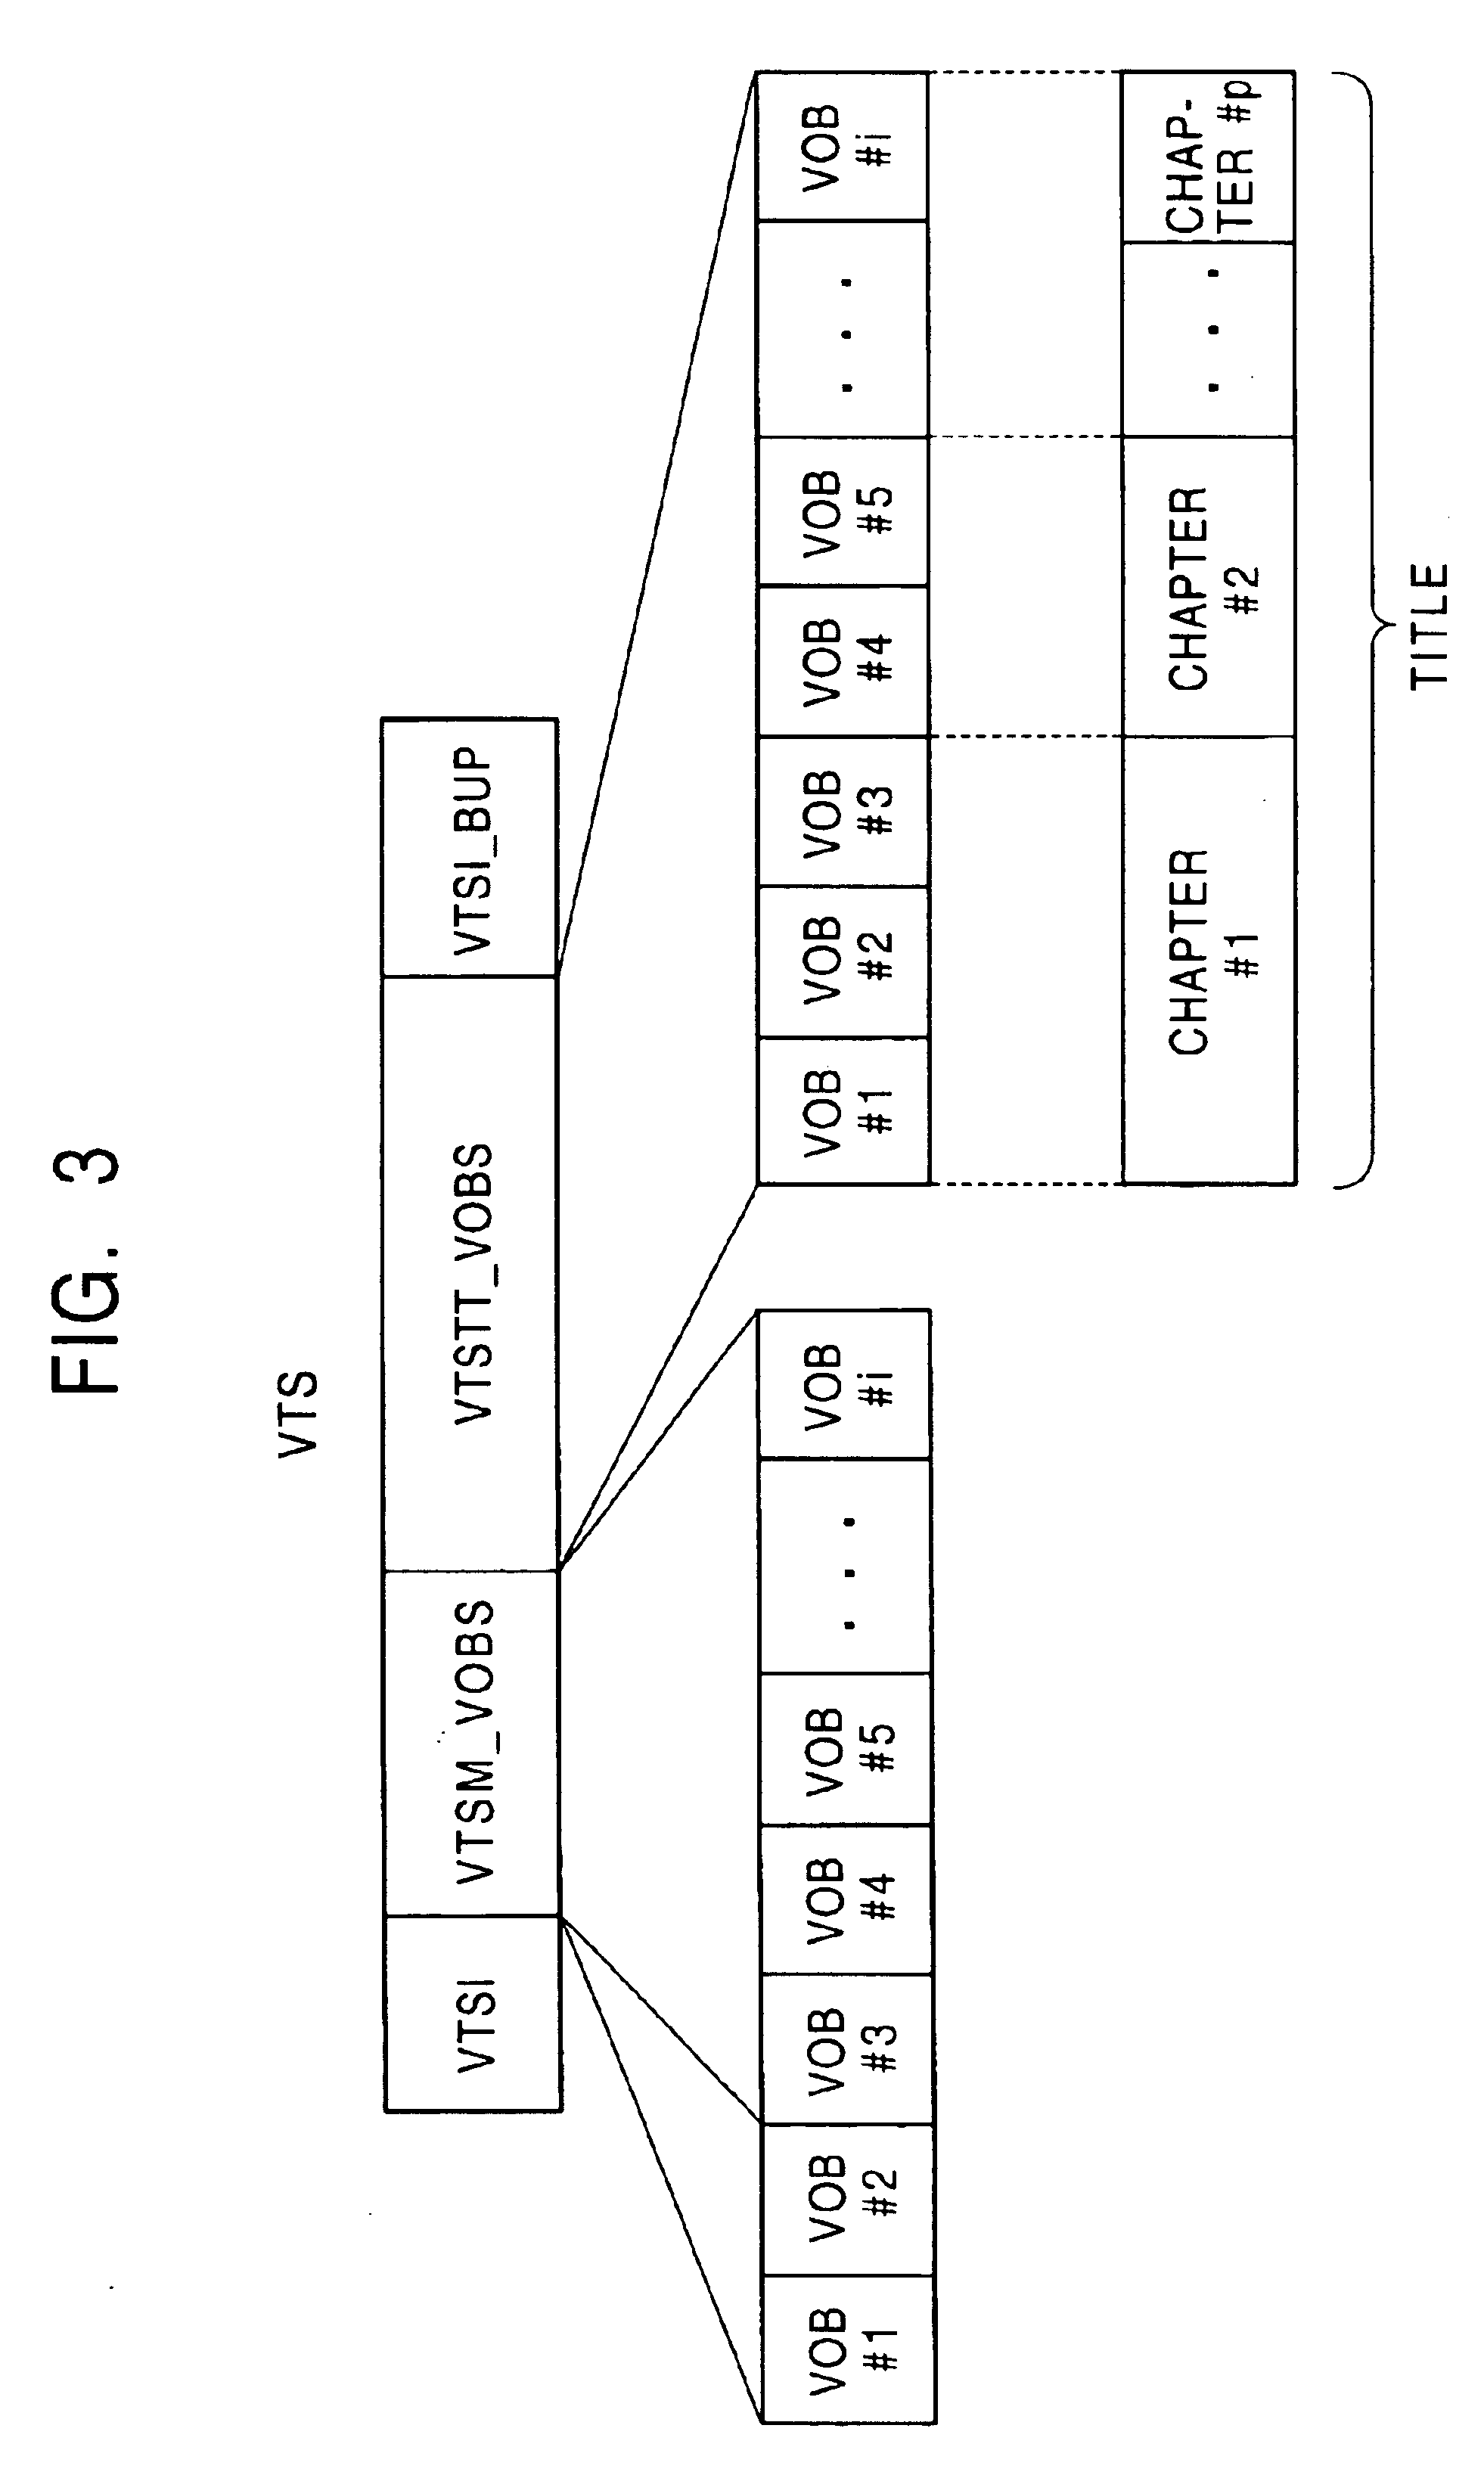 Disk player with location marking capability